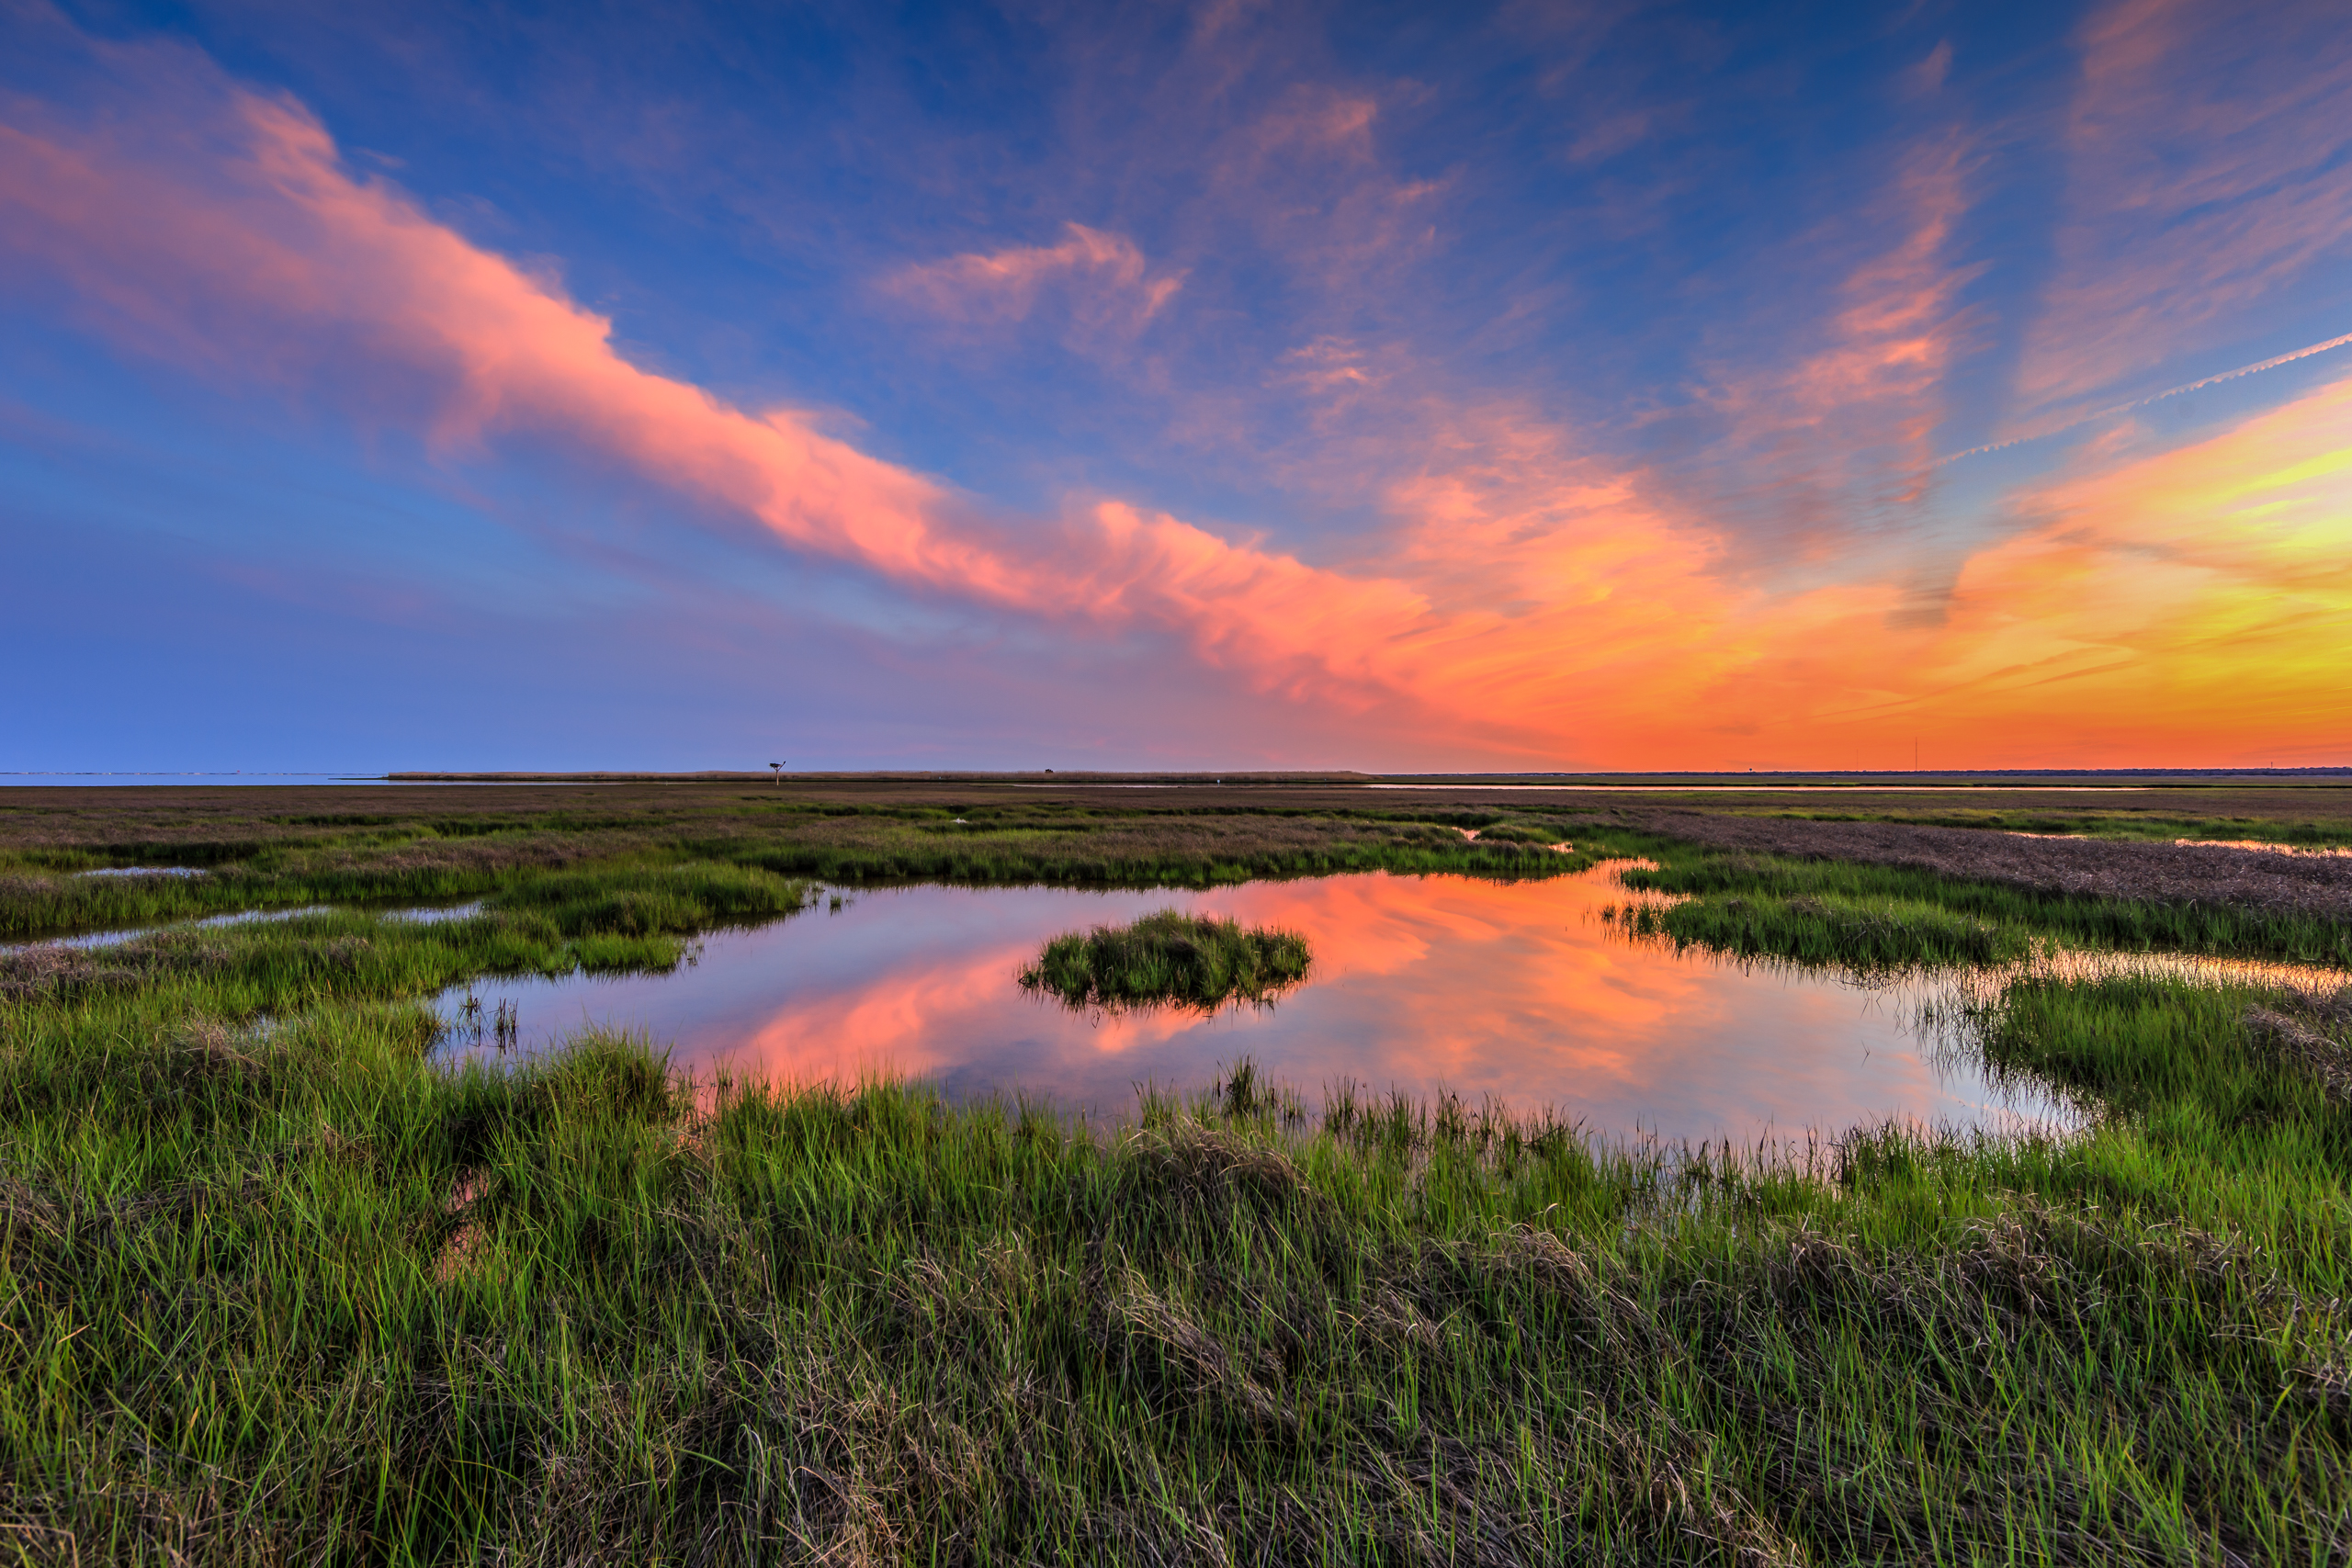 HDR sunset photo of a pastel sunset sky over a green marsh